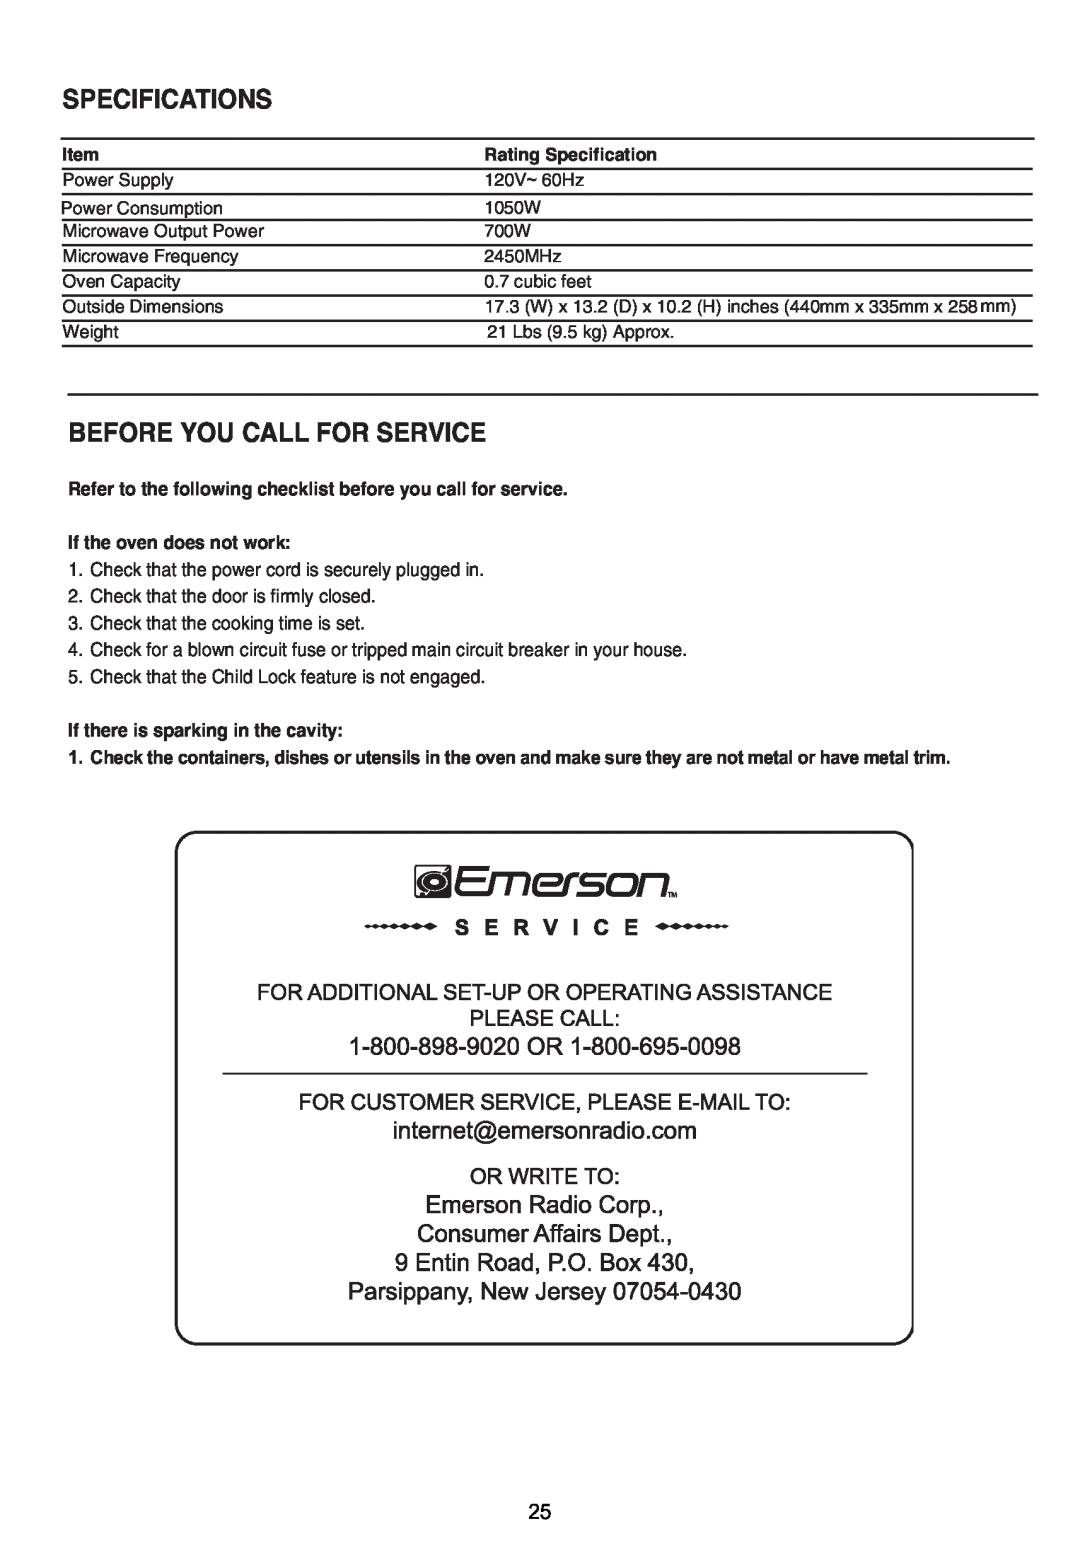 Emerson MW7302W Specifications, Before You Call For Service, Refer to the following checklist before you call for service 